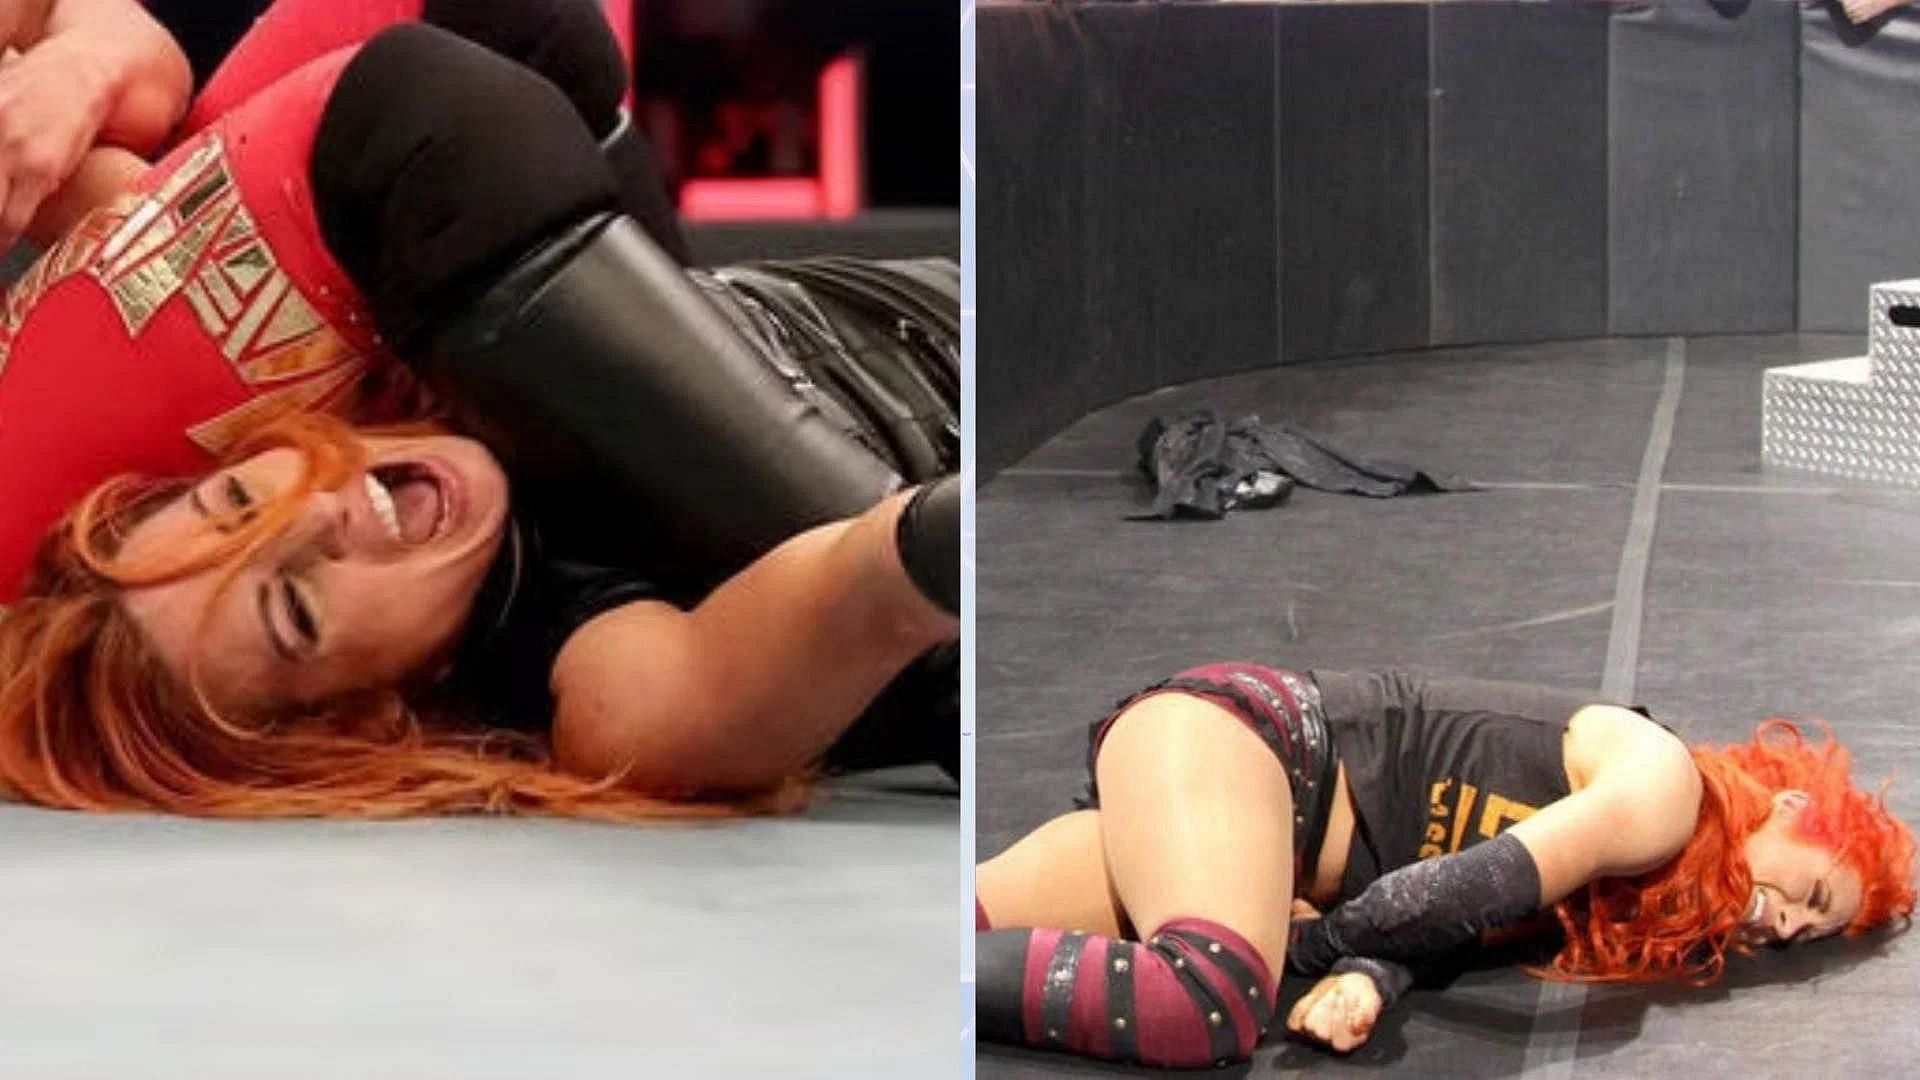 Becky Lynch is the current Women